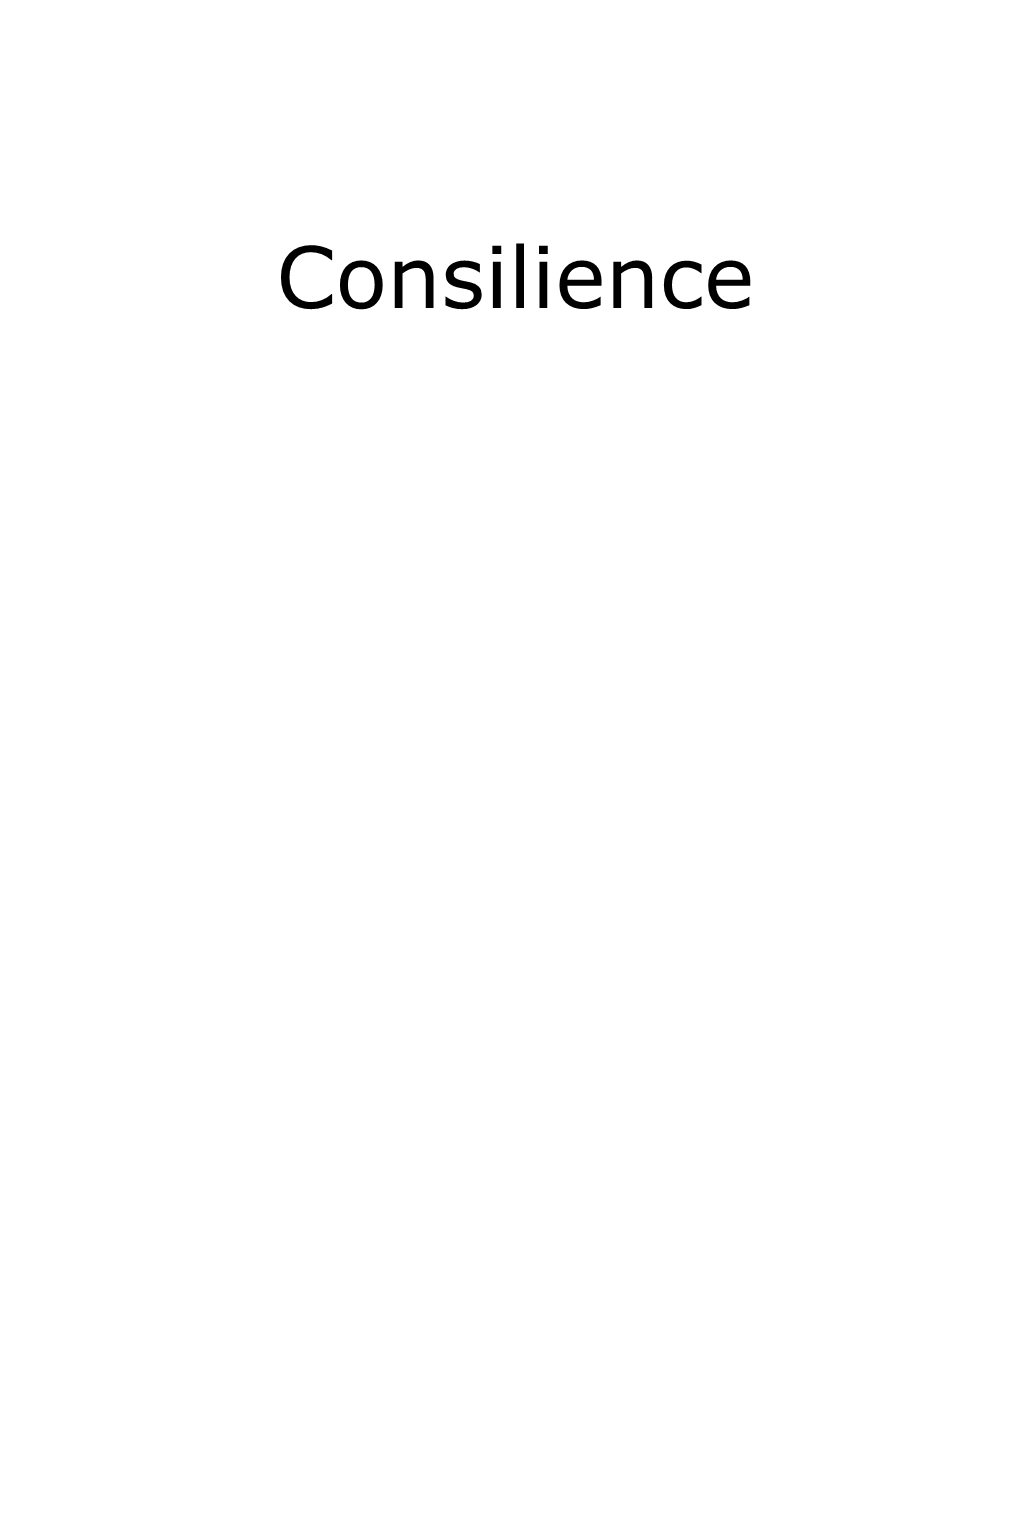 Consilience CONSILIENCE—ISBN: 978-0-9858914-3-5 © 2018 by John Campion